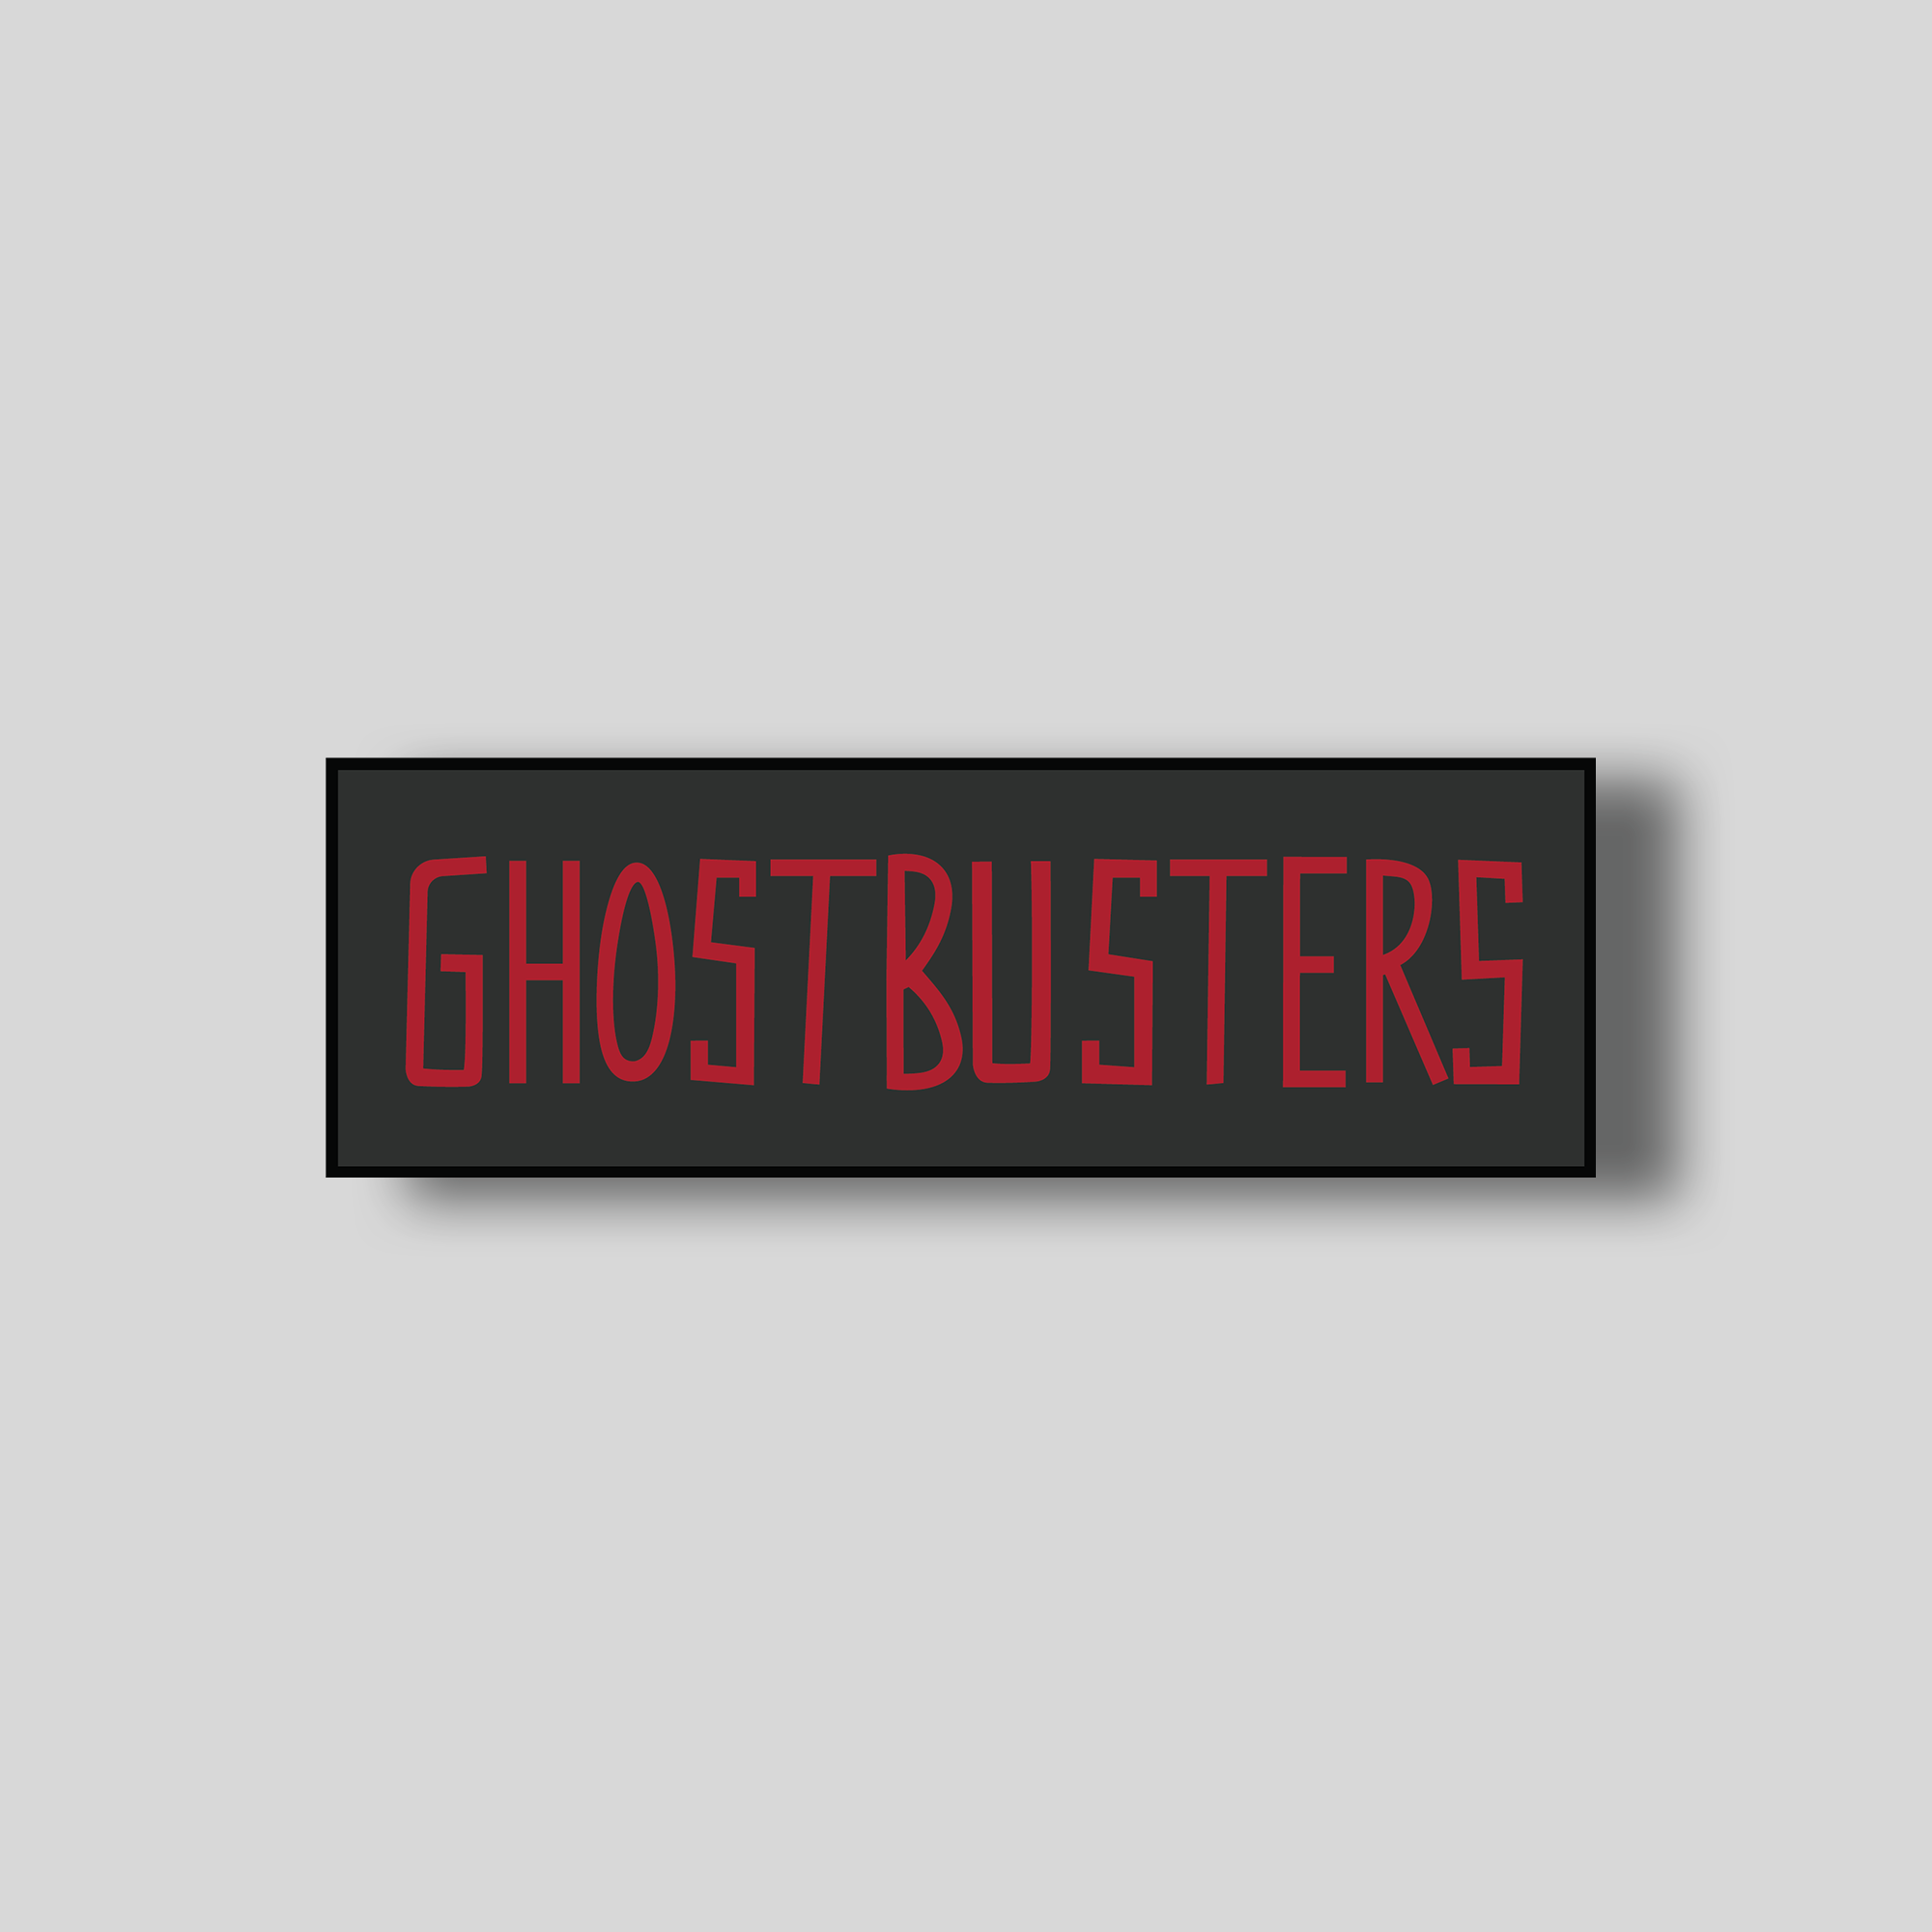 Ghostbusters-ShopifyImages-Patches-GB-R4_0c87b64e-b43c-4d9b-bf22-8d11c46eb8a8.png